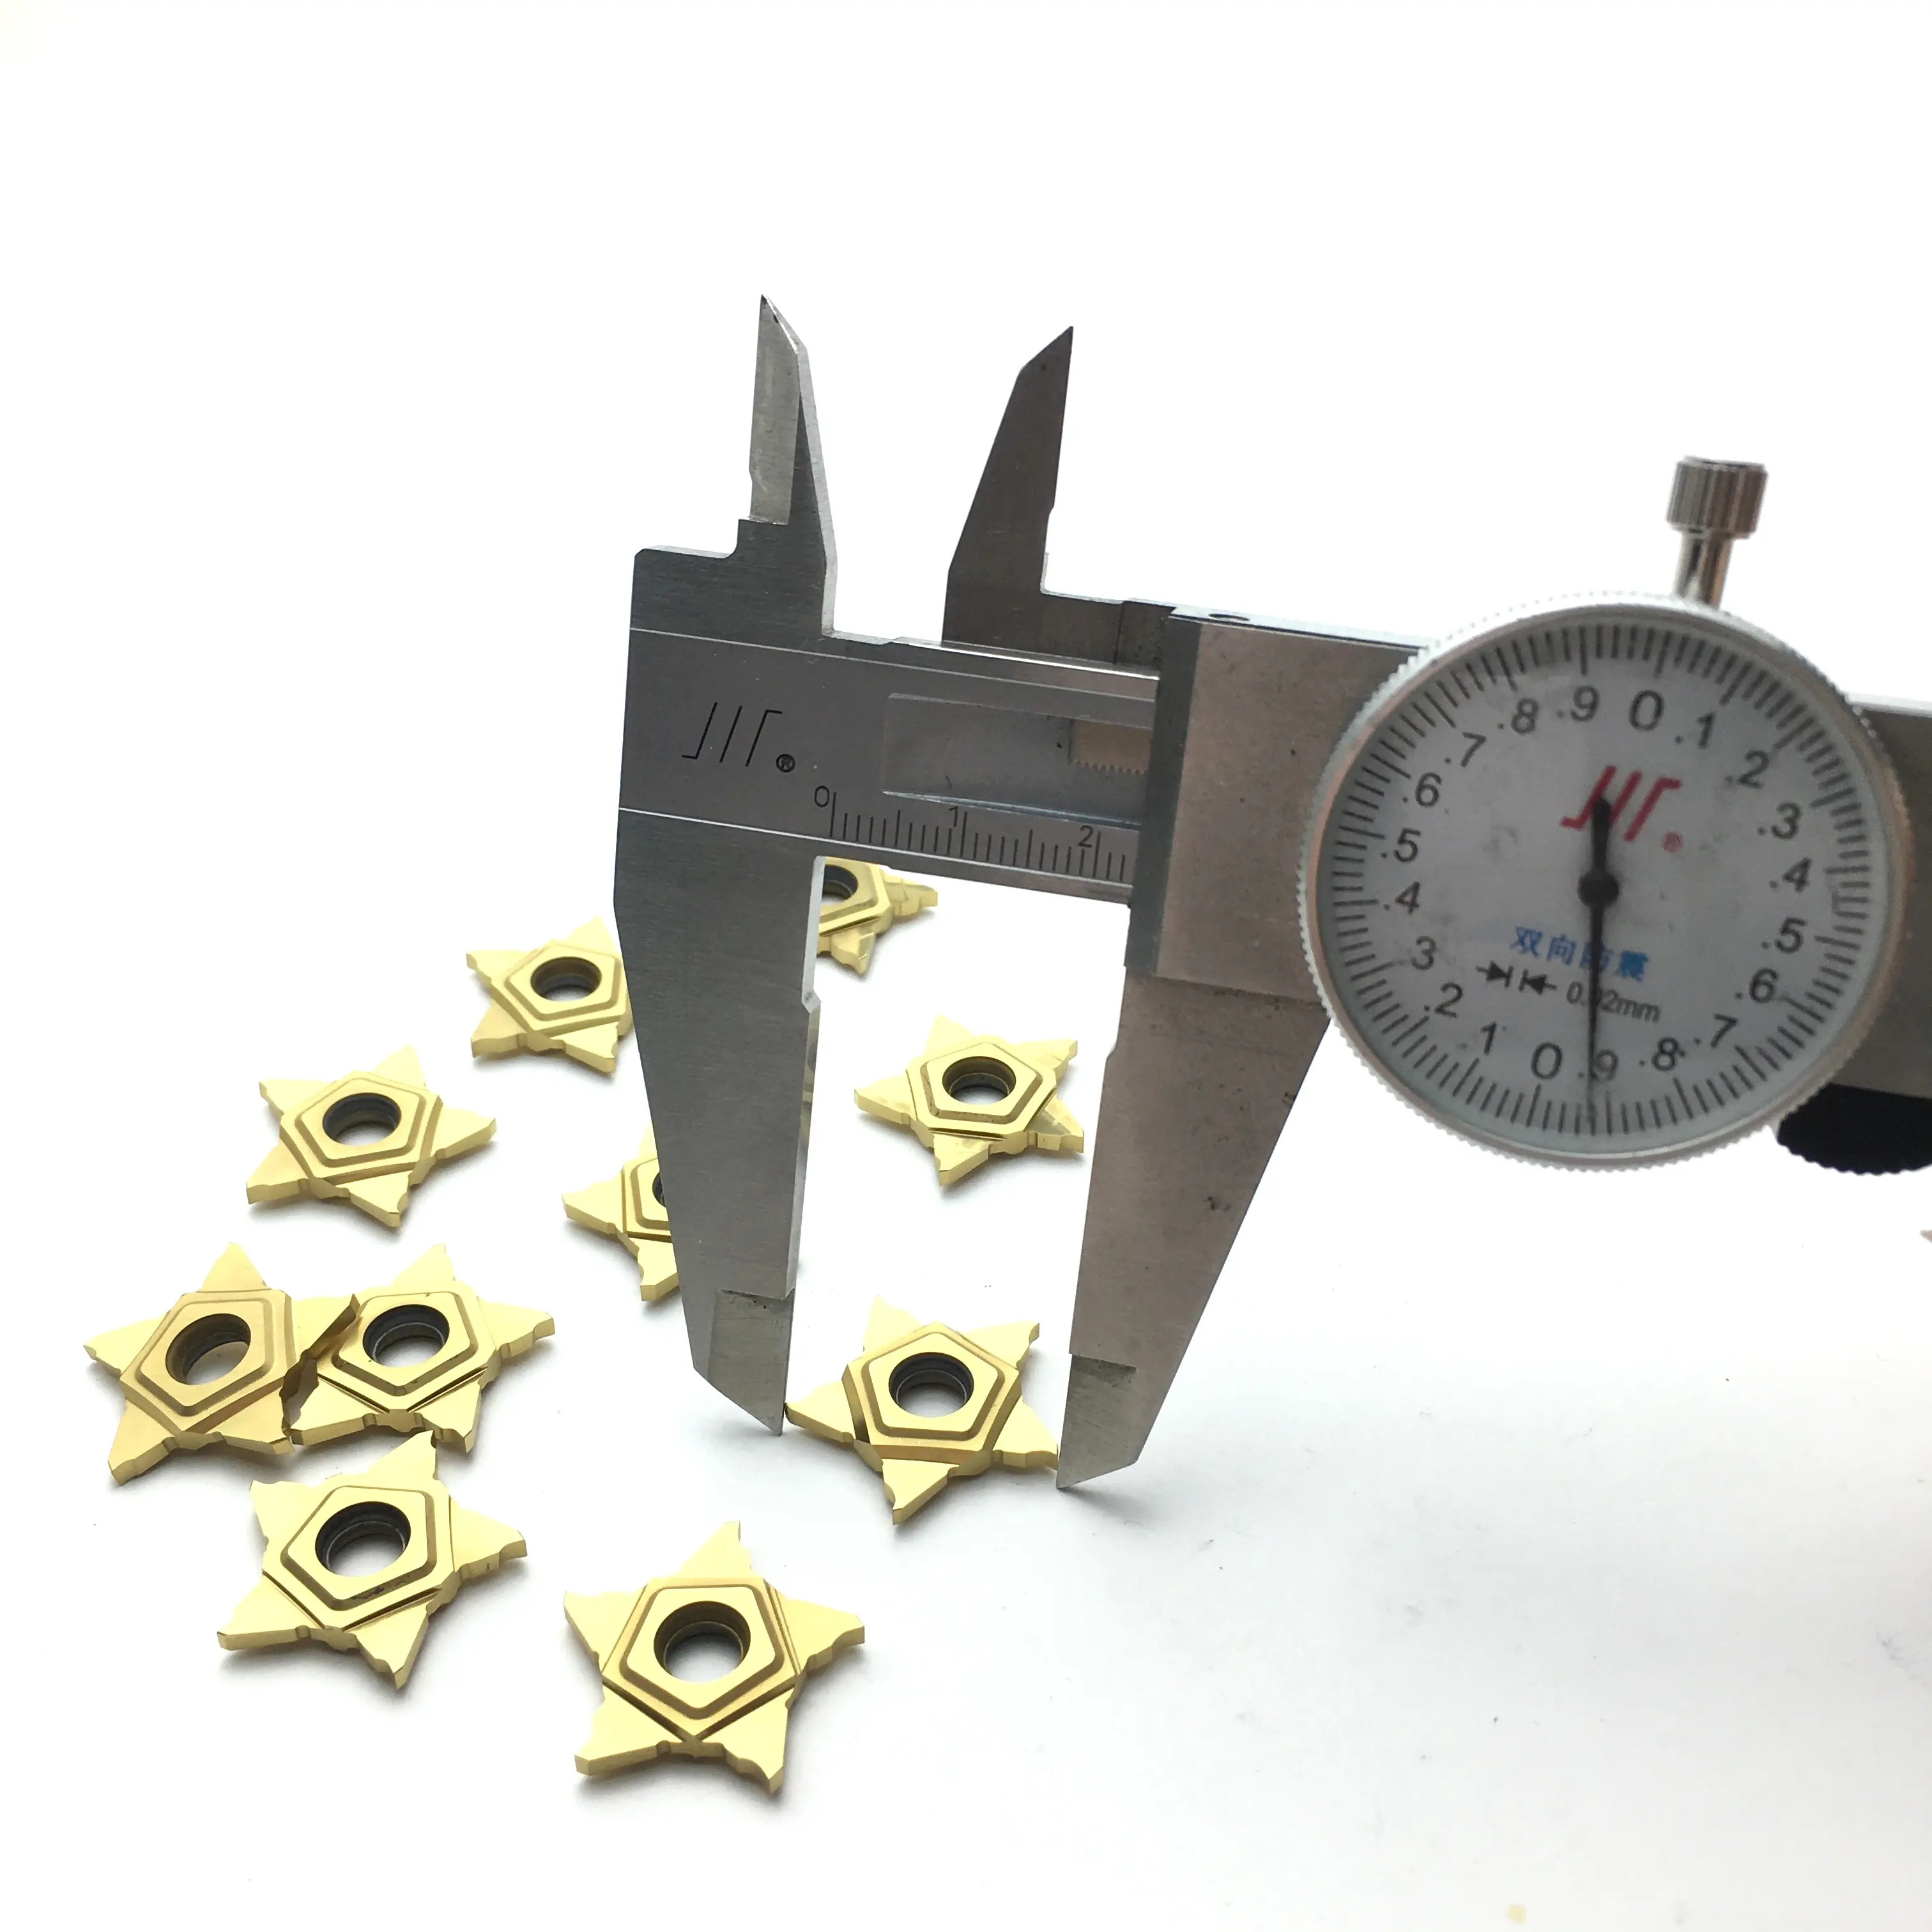 PENTA 24N200-S safety cnc lathe turning cutter for steel and stainless steel tungsten carbide inserts